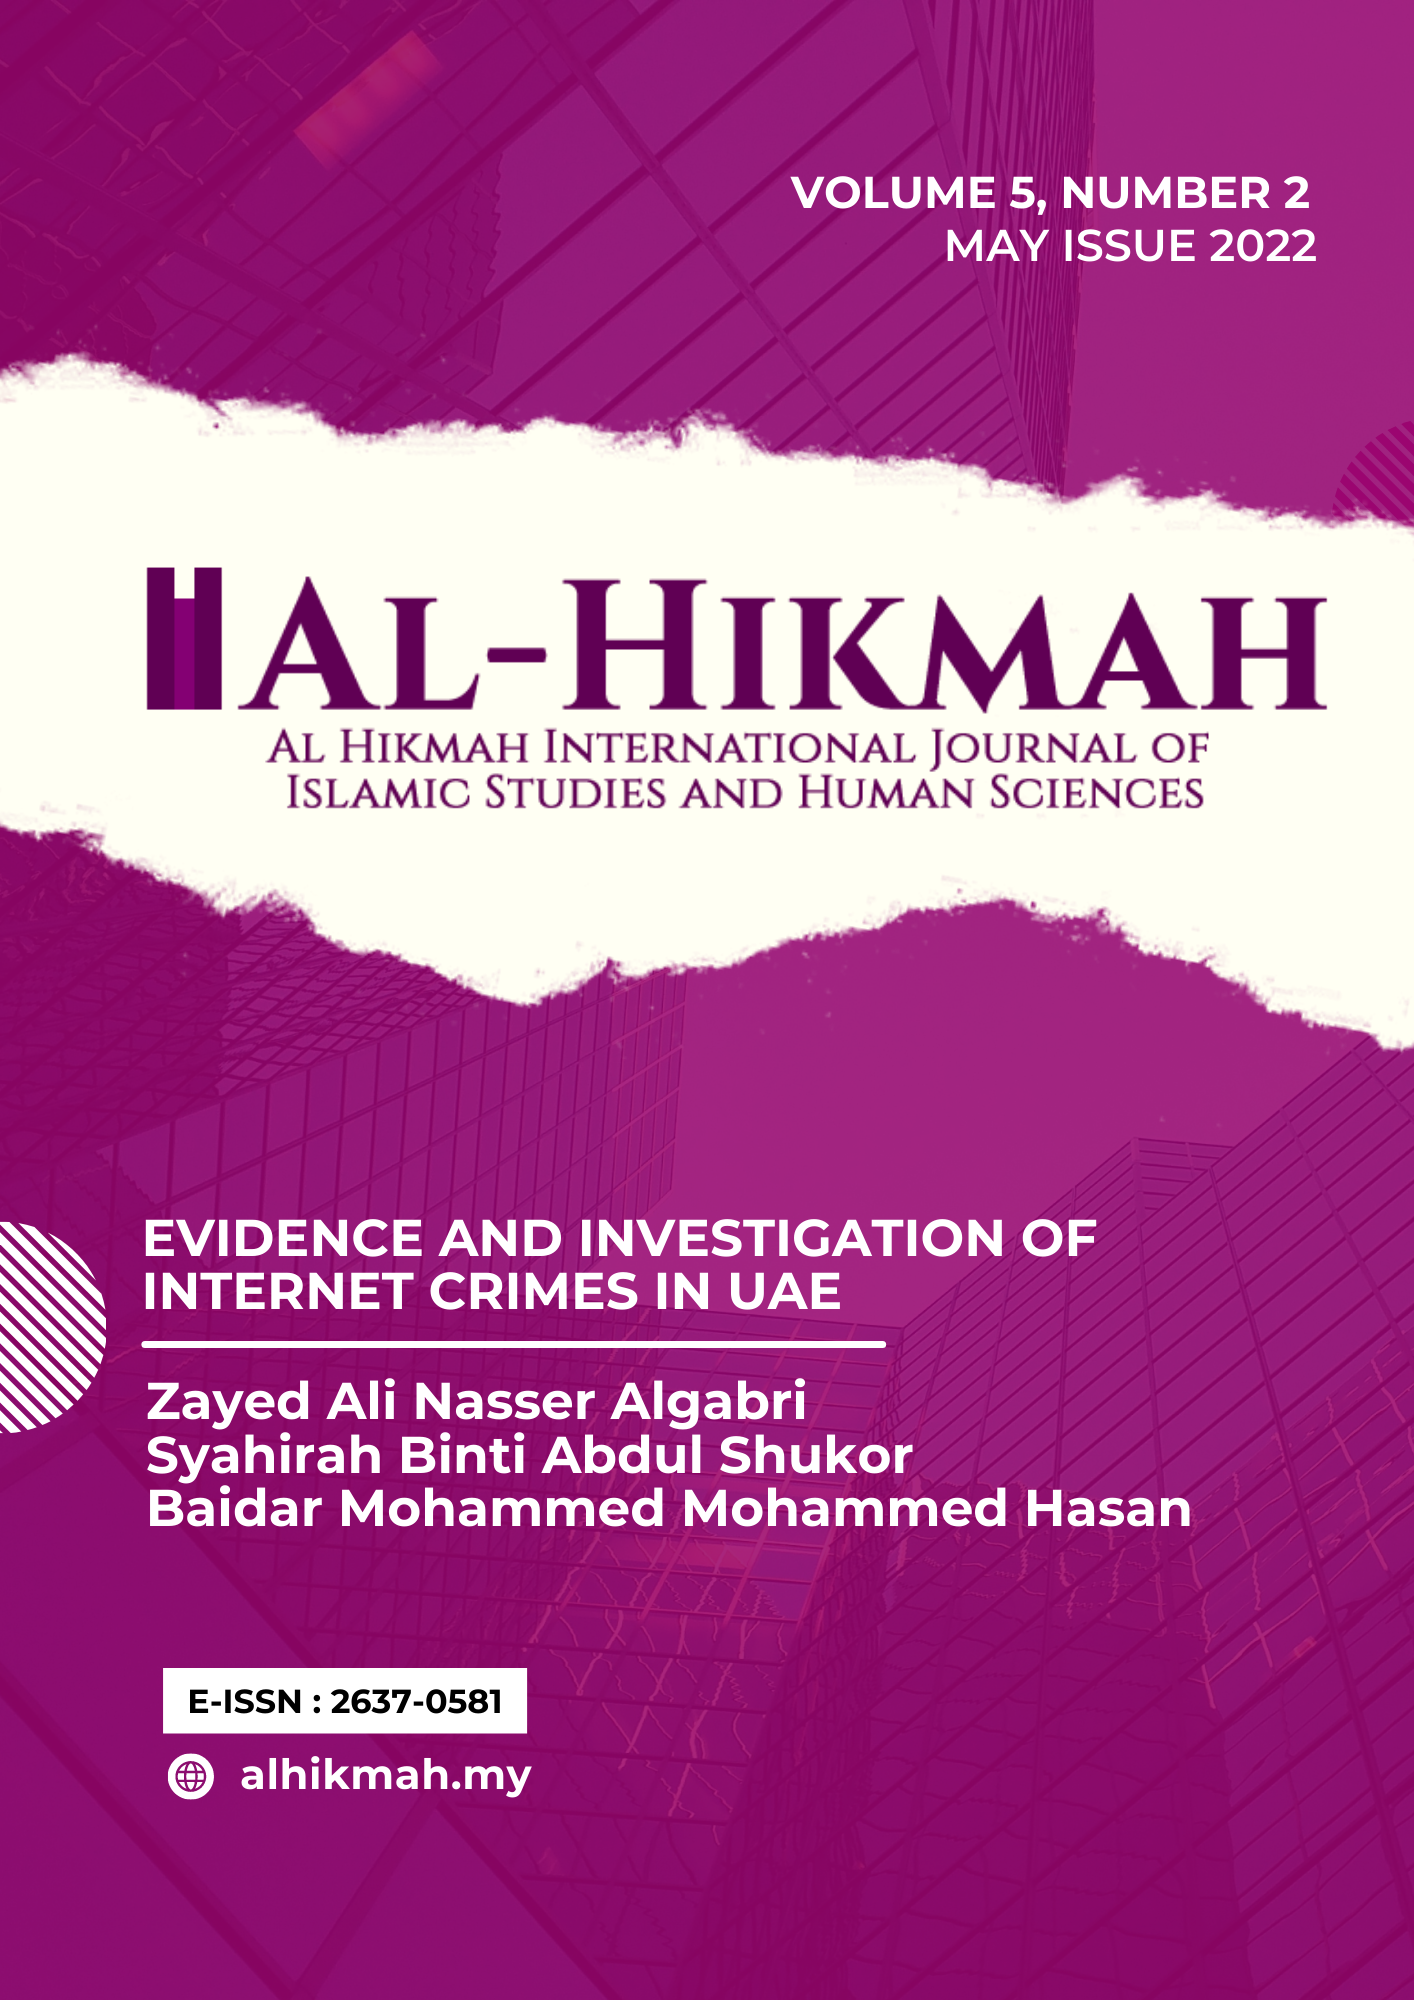 The May 2022 issue of the Journal of Islamic Studies and Human Sciences is now available online!